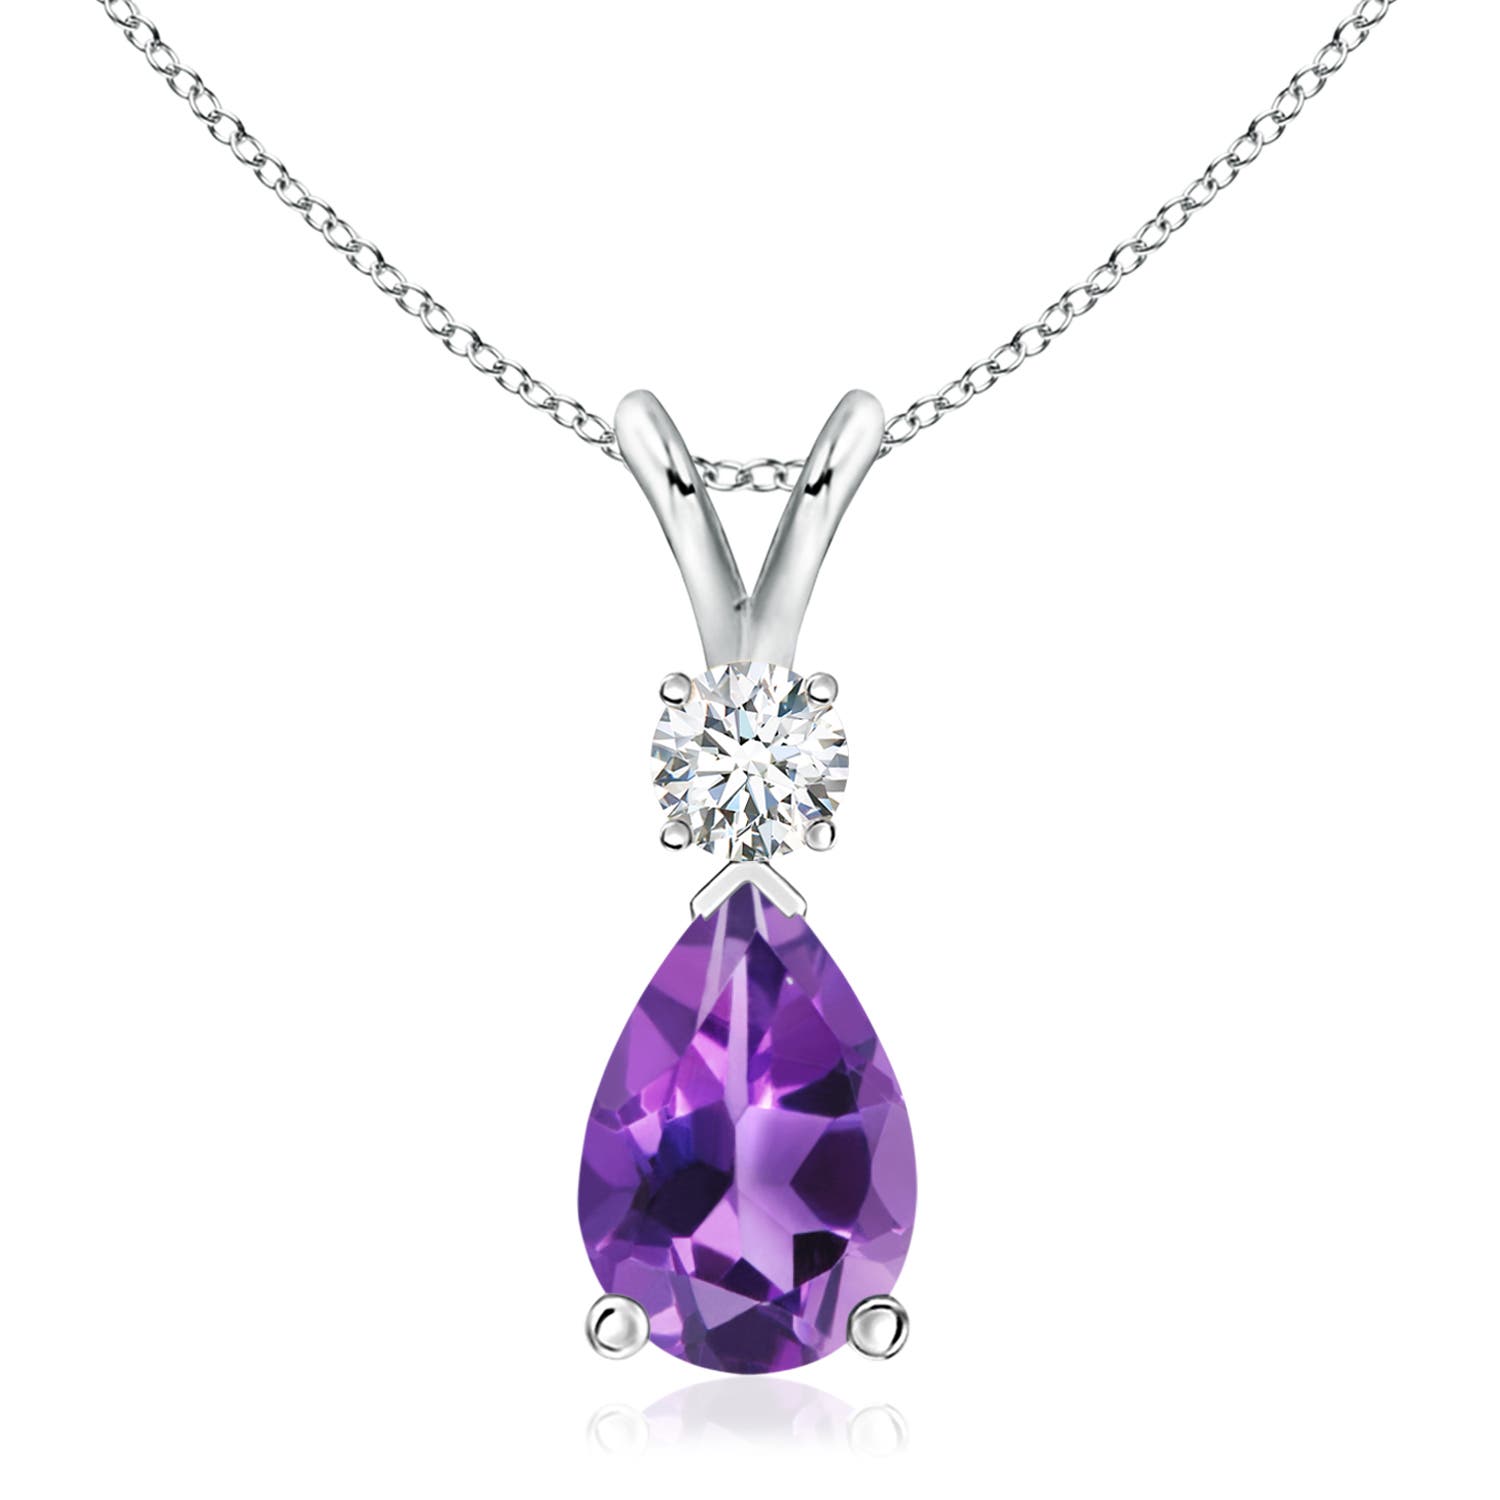 AAA - Amethyst / 2.78 CT / 14 KT White Gold